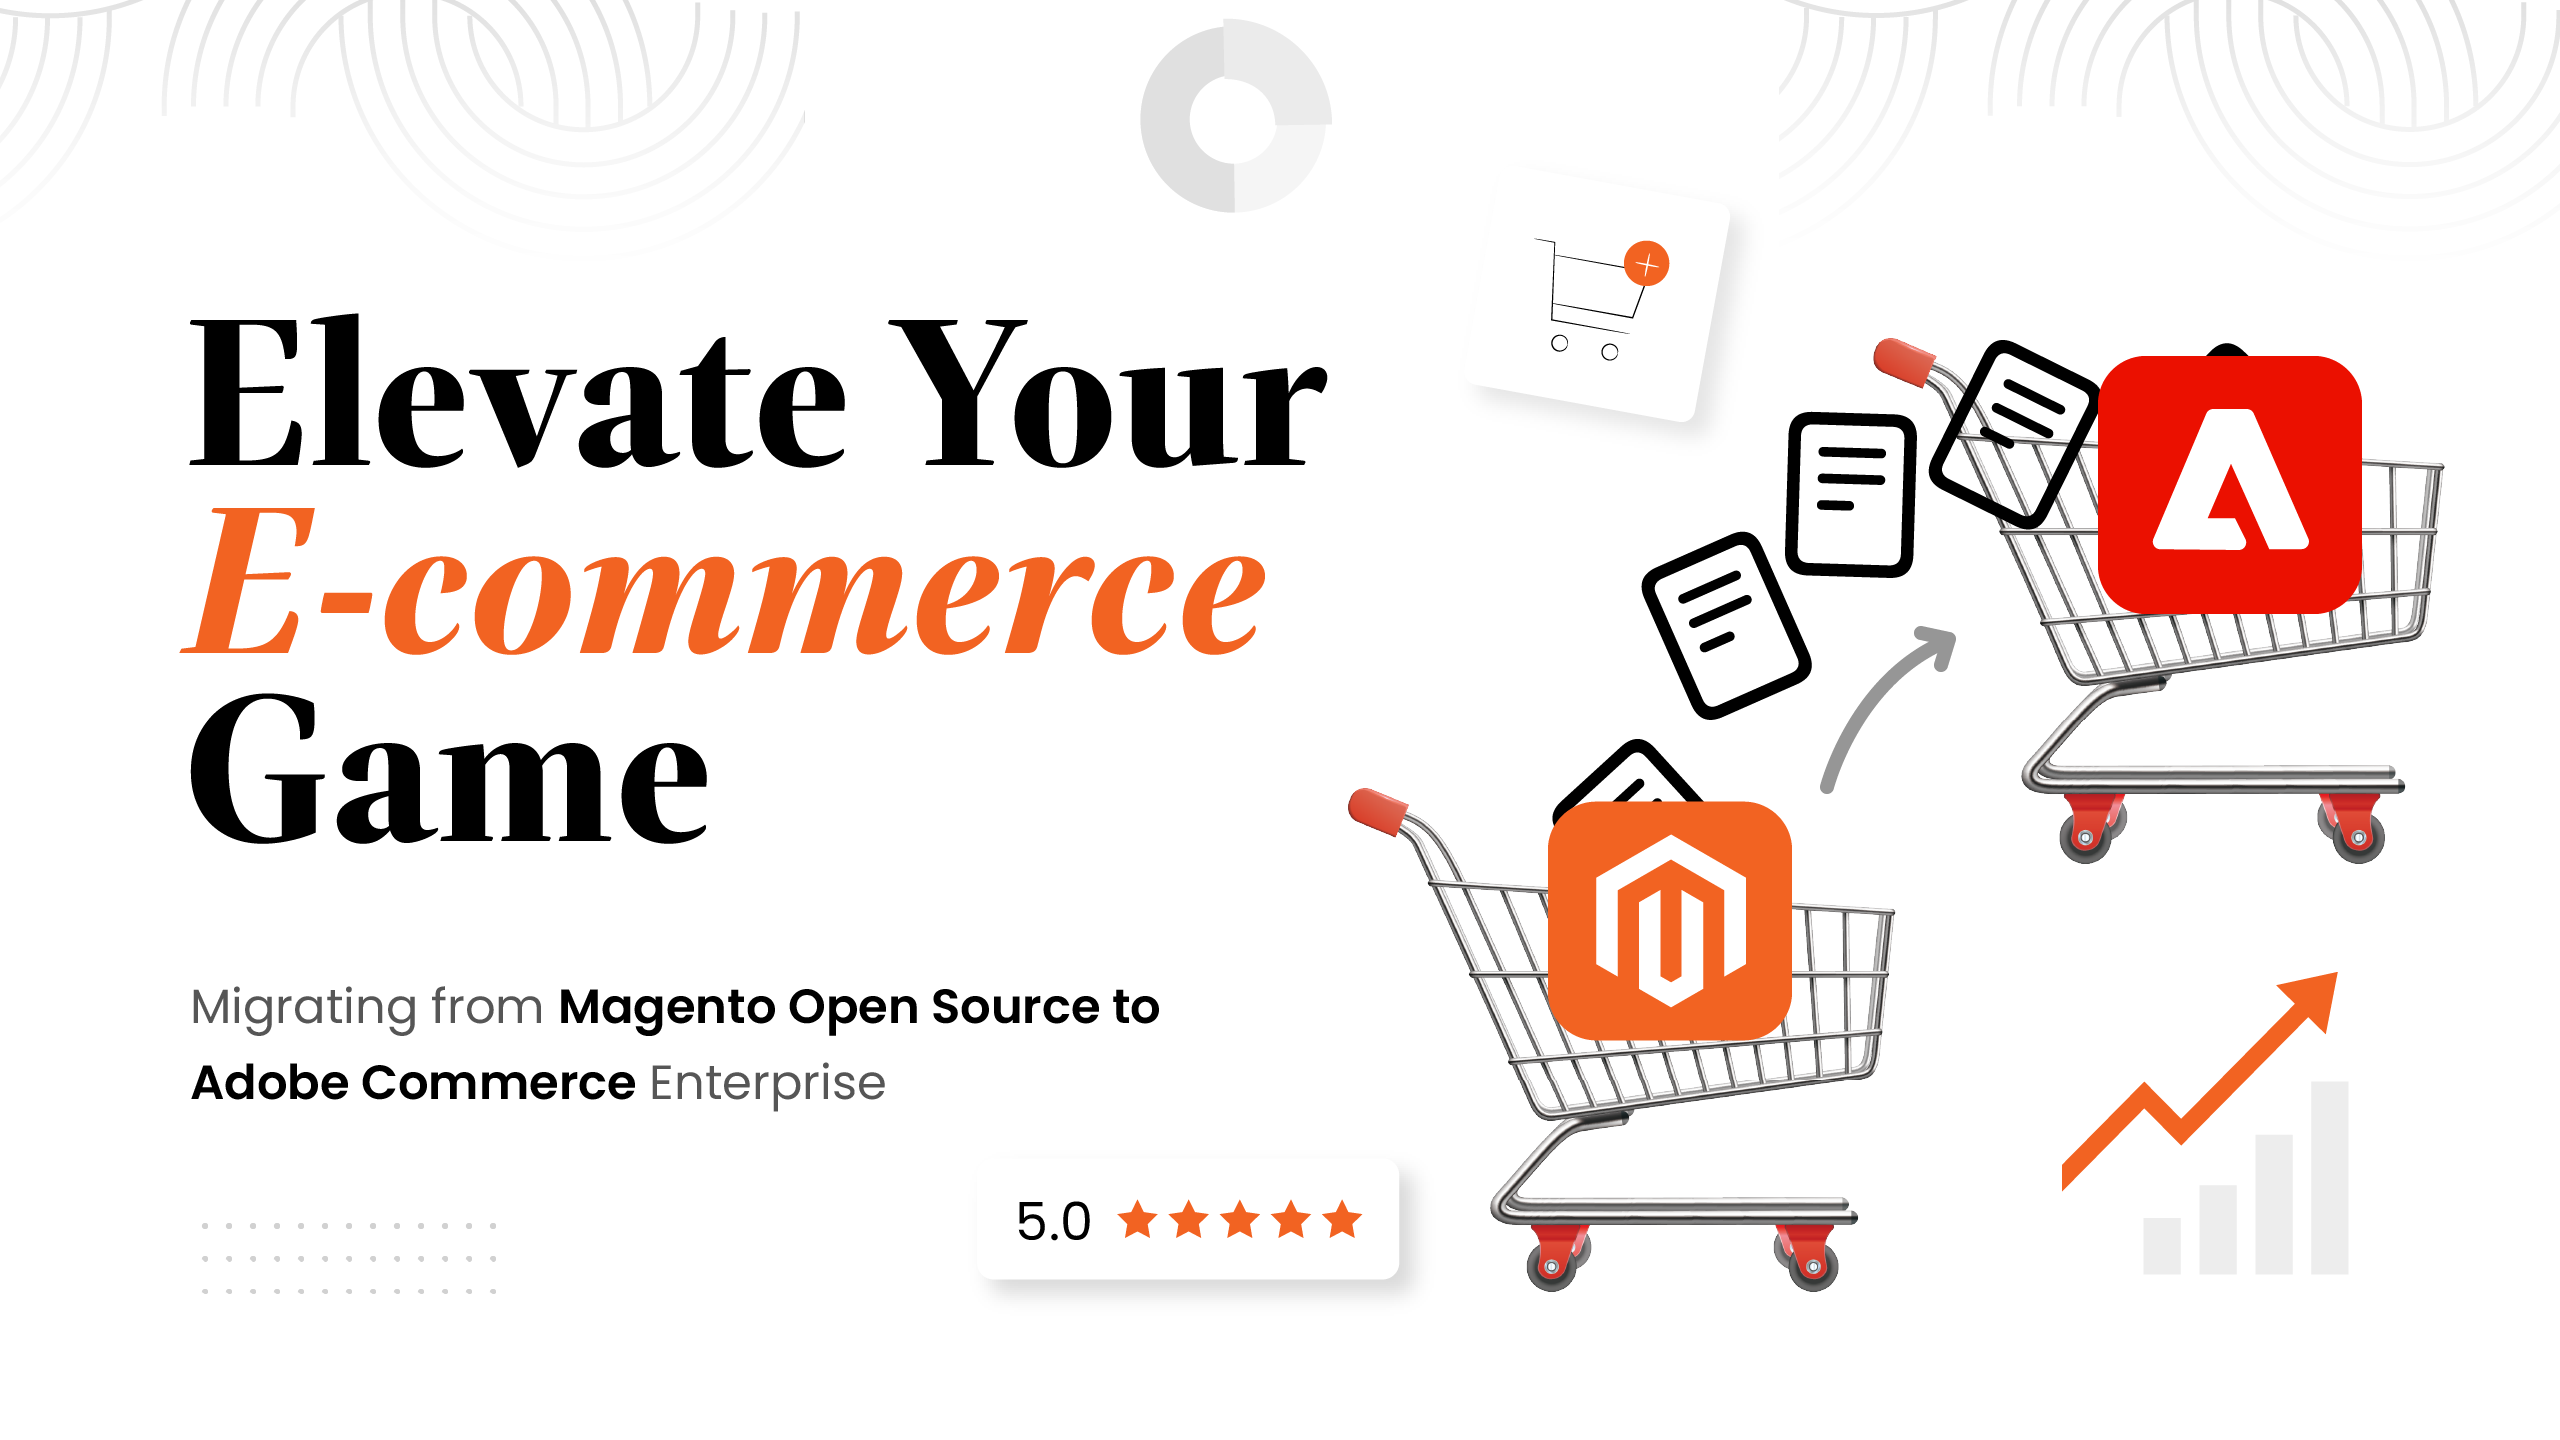 Elevate Your E-commerce Game: Migrating from Magento Open Source to Adobe Commerce Enterprise